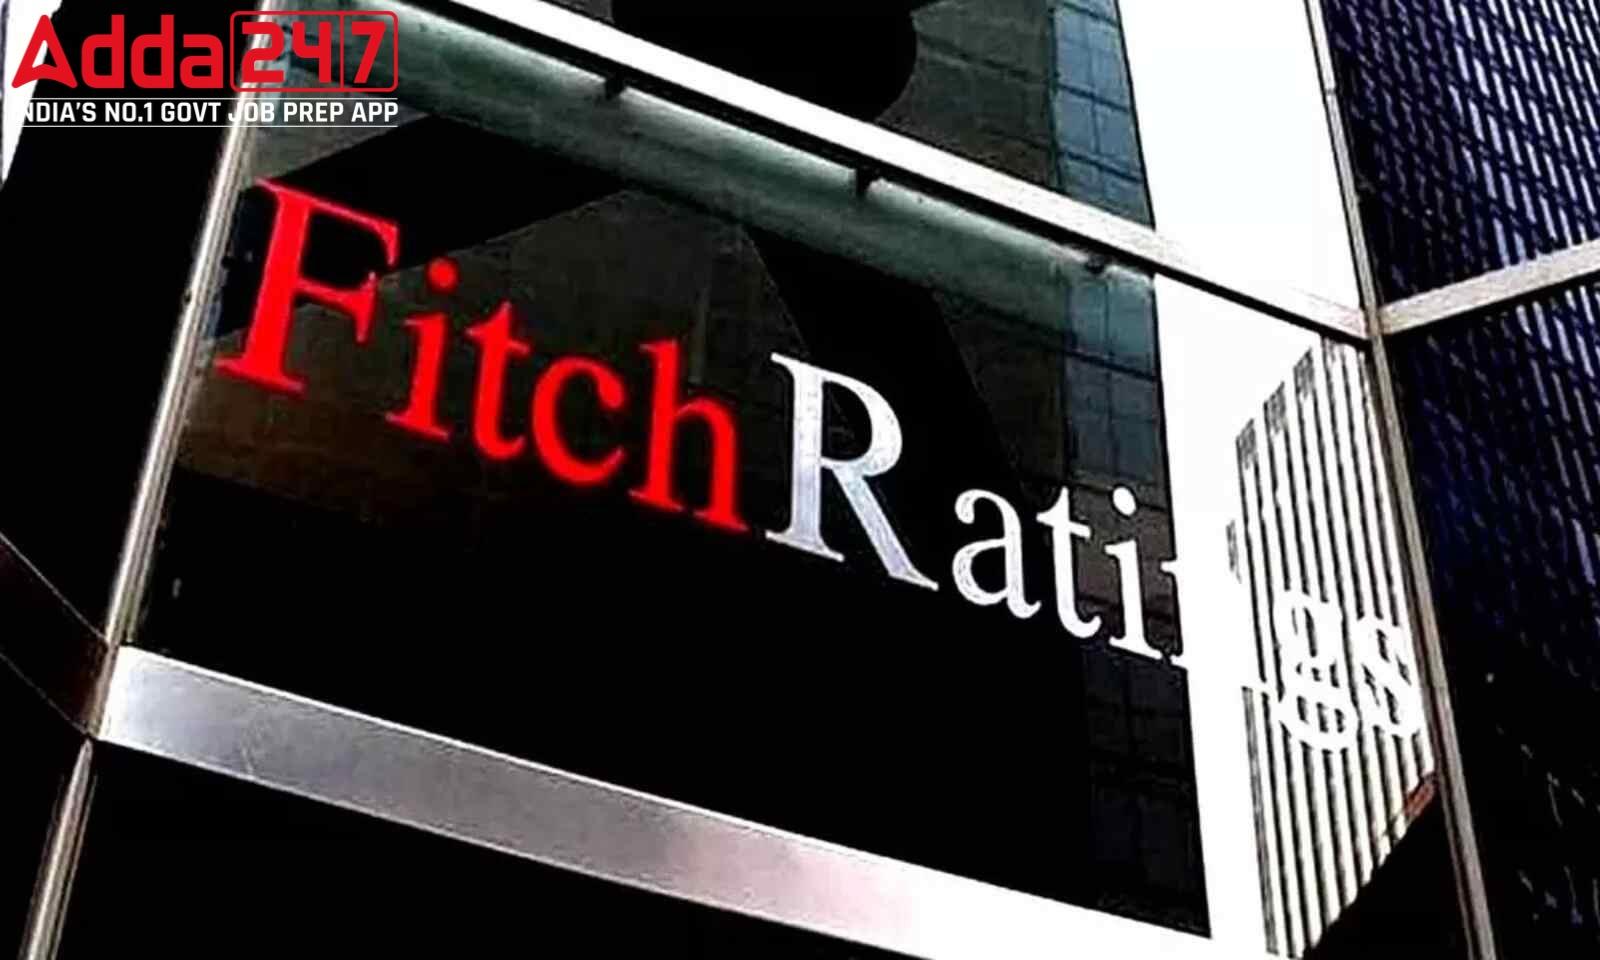 Fitch Cuts India's Economic Growth Forecast for FY23 to 7% from Previous Estimate of 7.8%_40.1